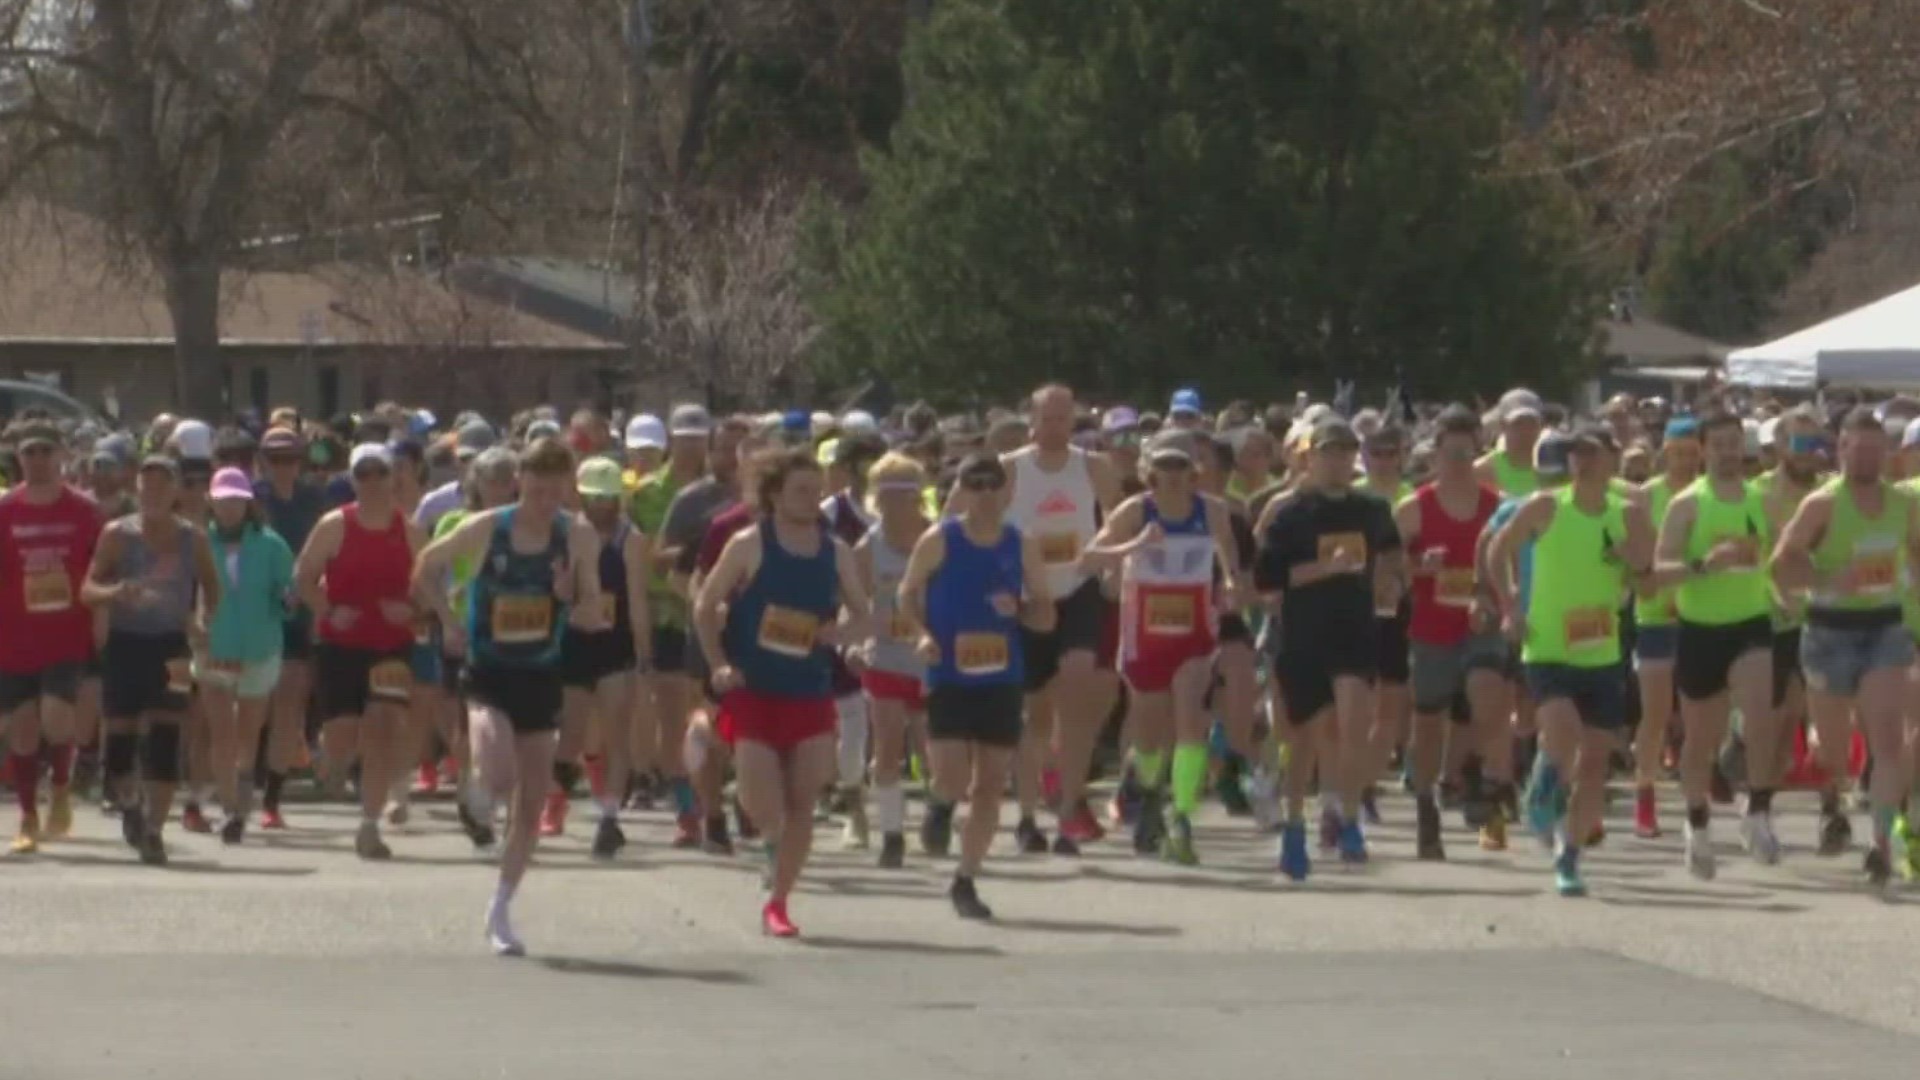 The race, which is in its 47th year, is billed as the "toughest half marathon in the Northwest."